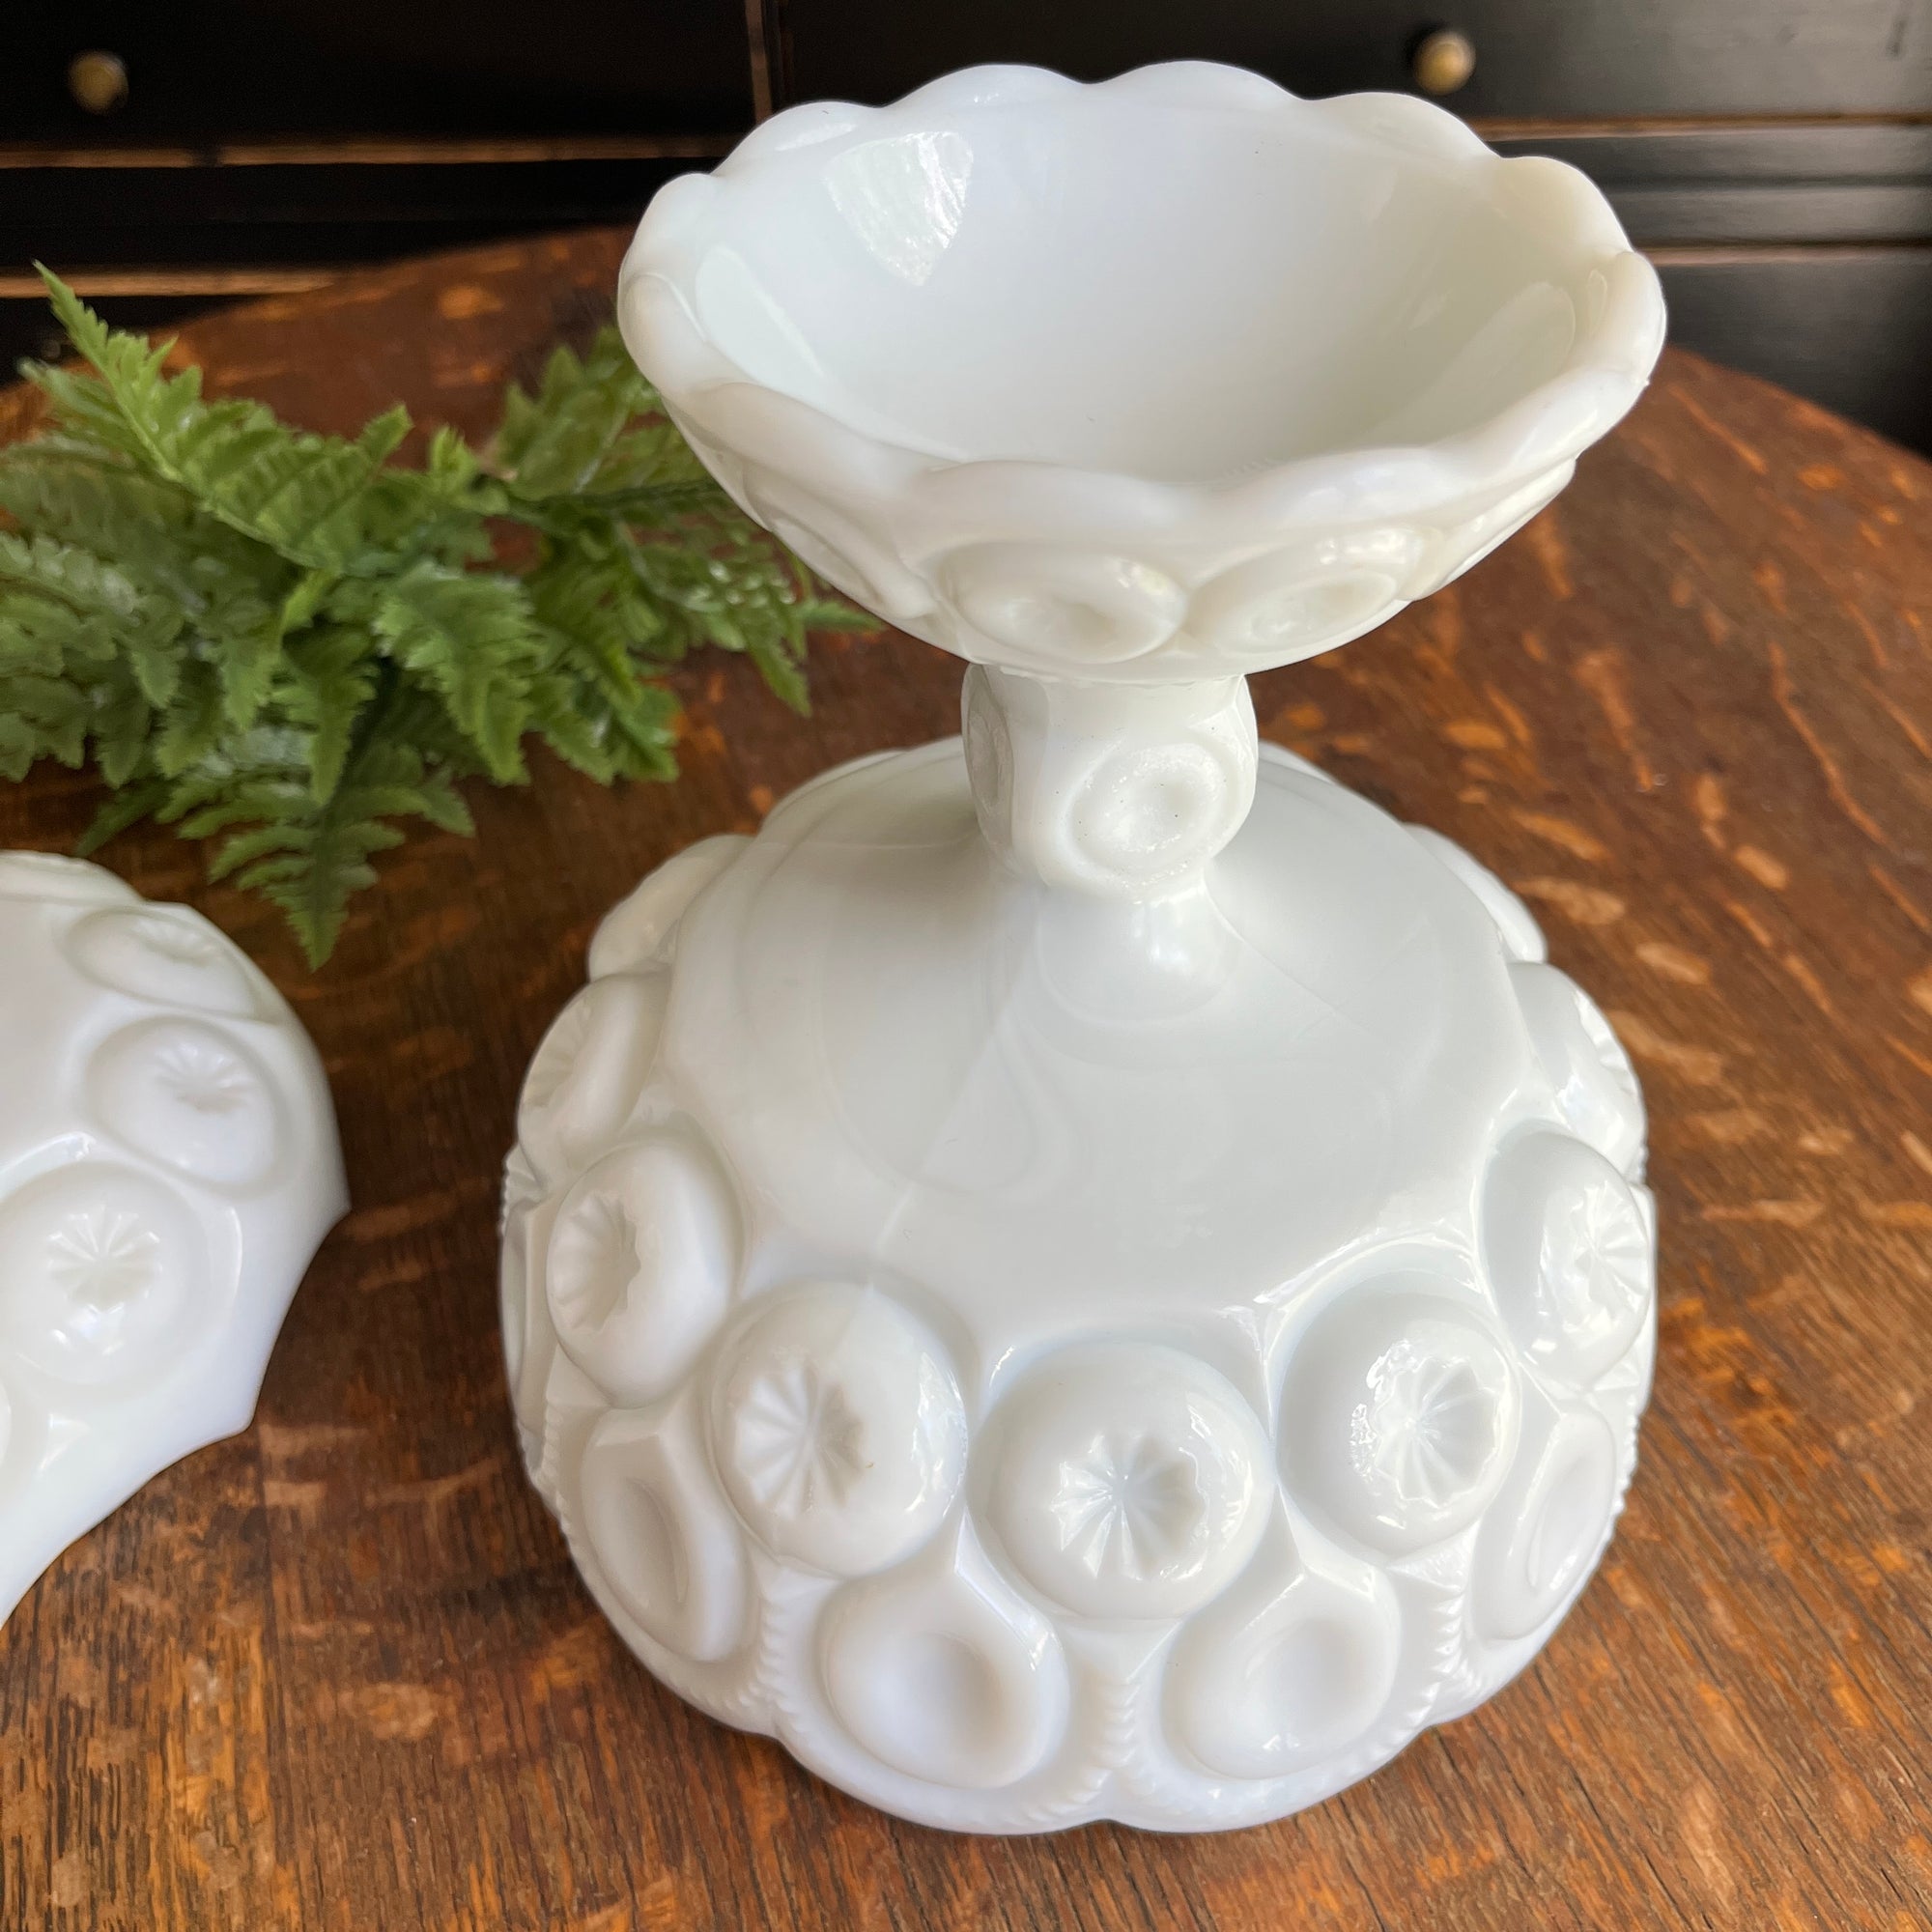 L.E. Smith Glass Company Milk Glass Lidded Compote in ‘Moon & Stars’ Pattern